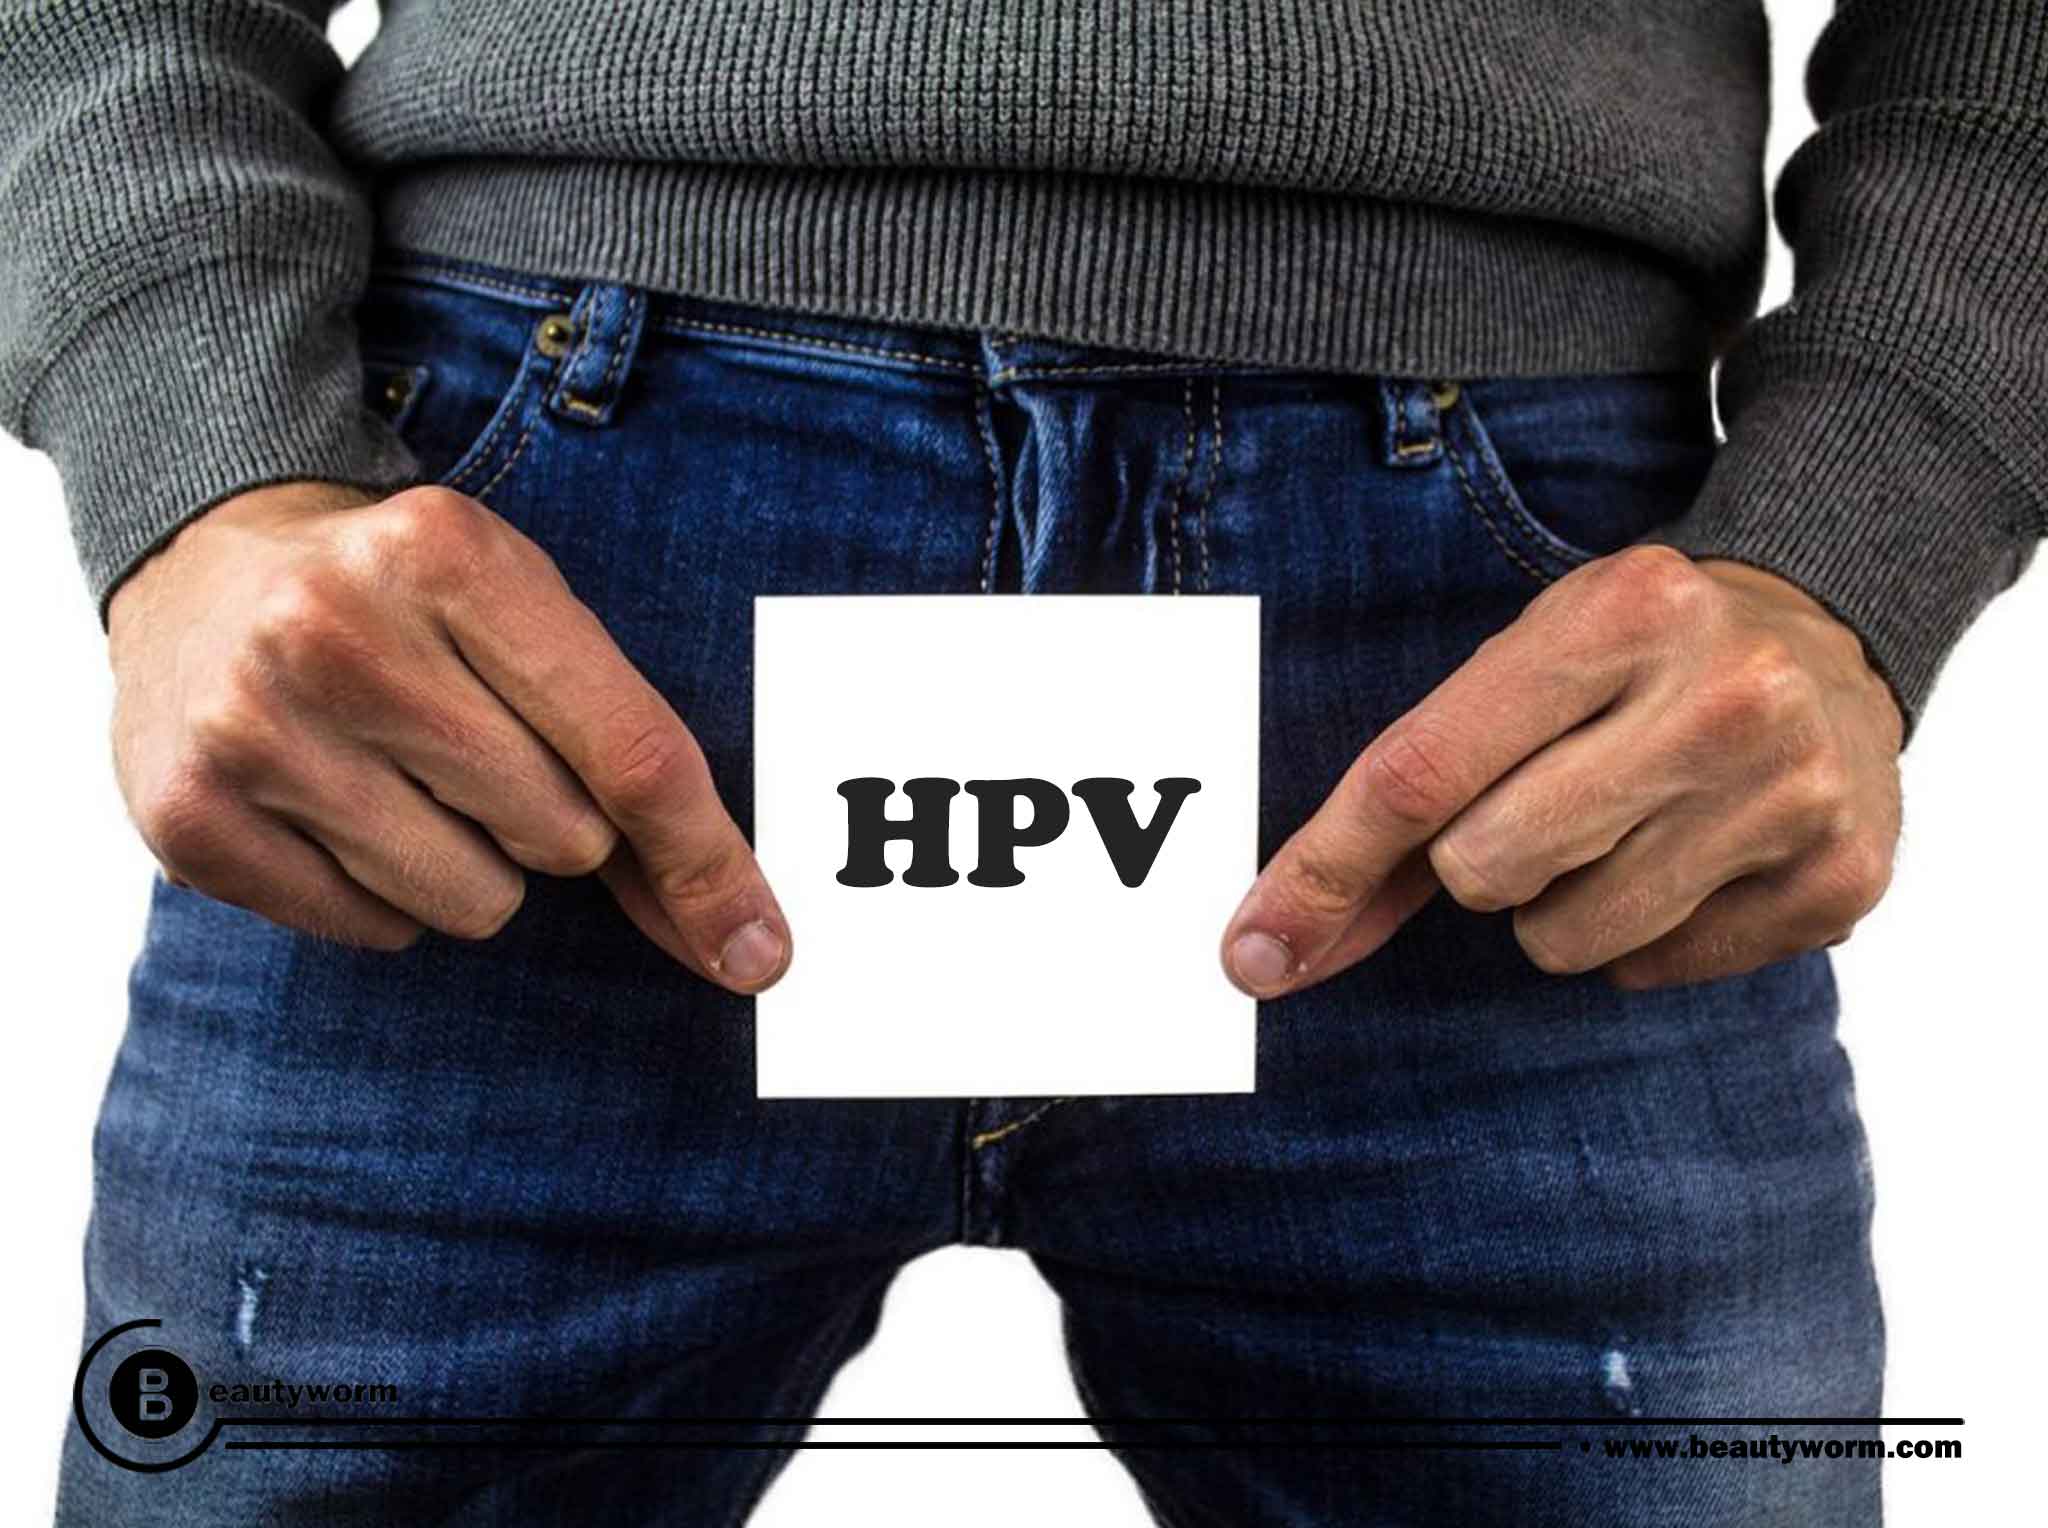 How does HPV affect Men?